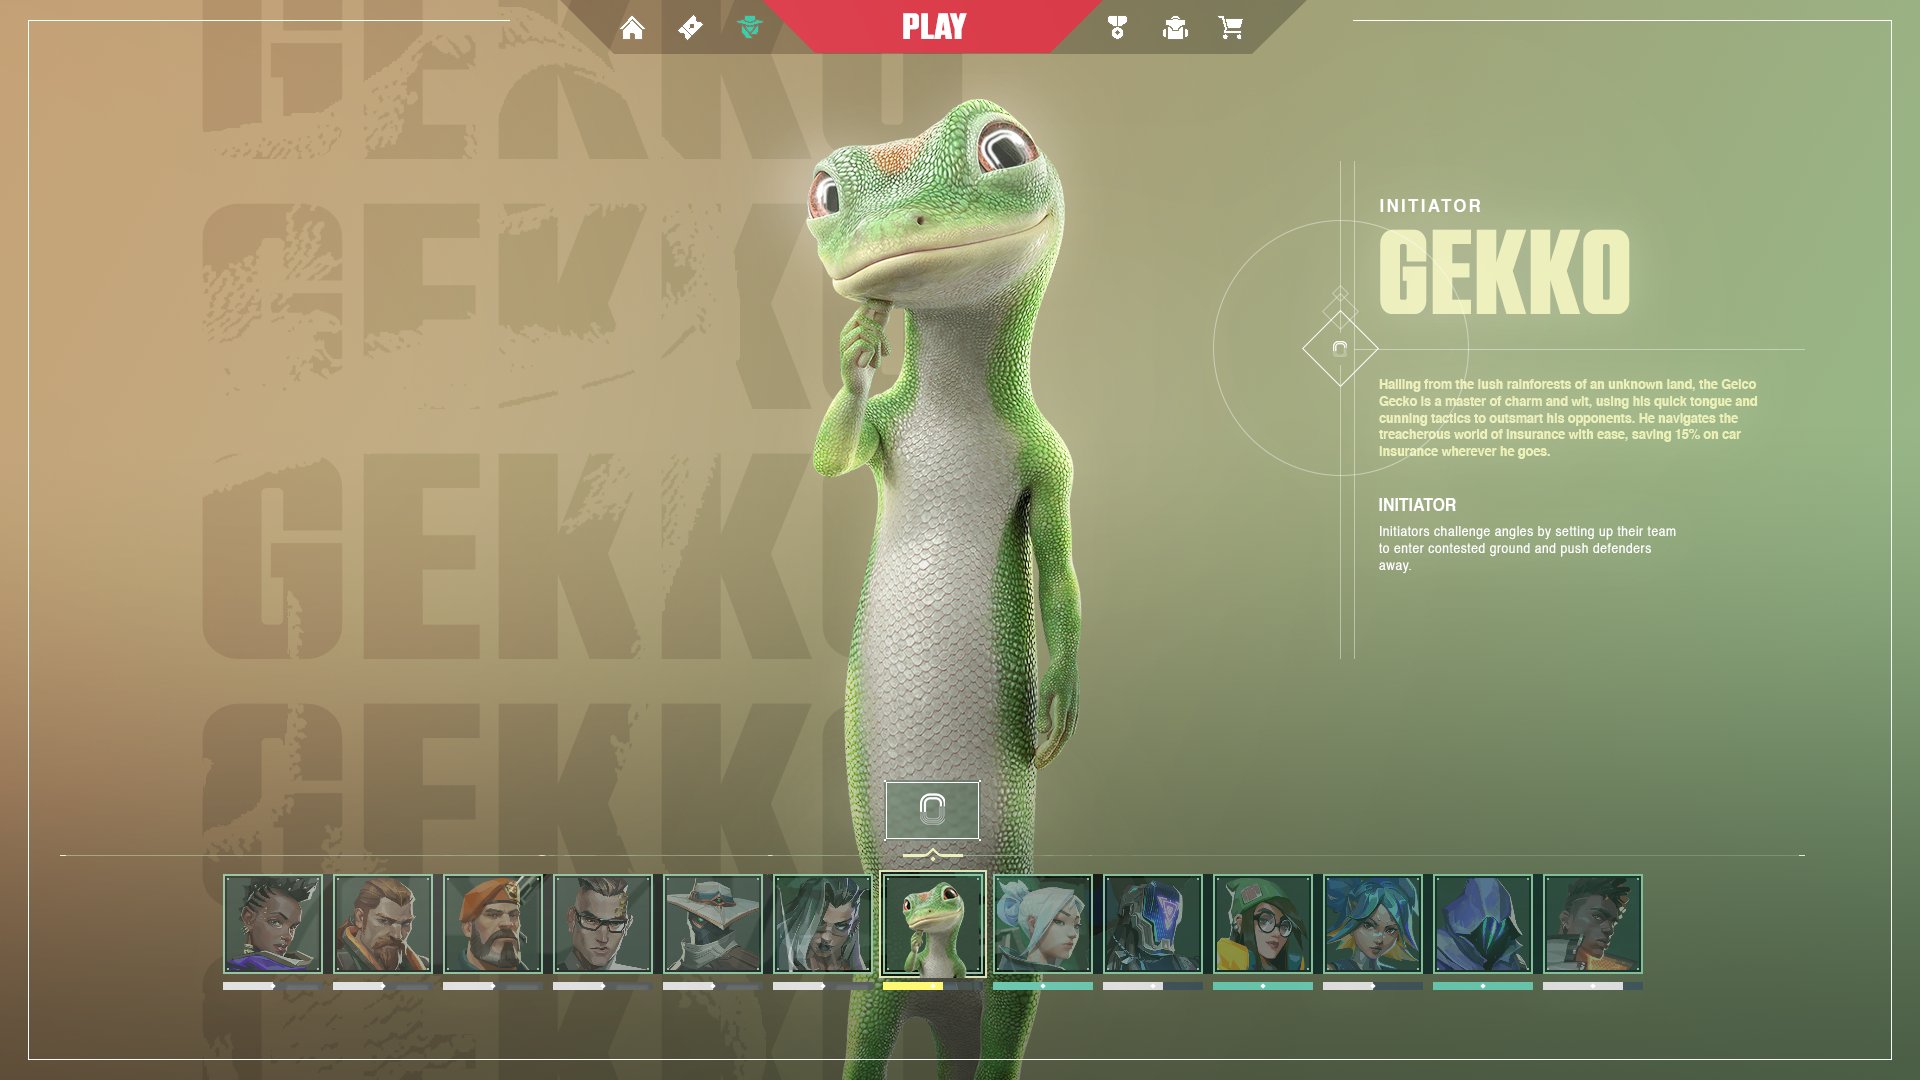 VALORANT Leaks New Agent: GEKKO. #VALORANT With green hair and a bold new look